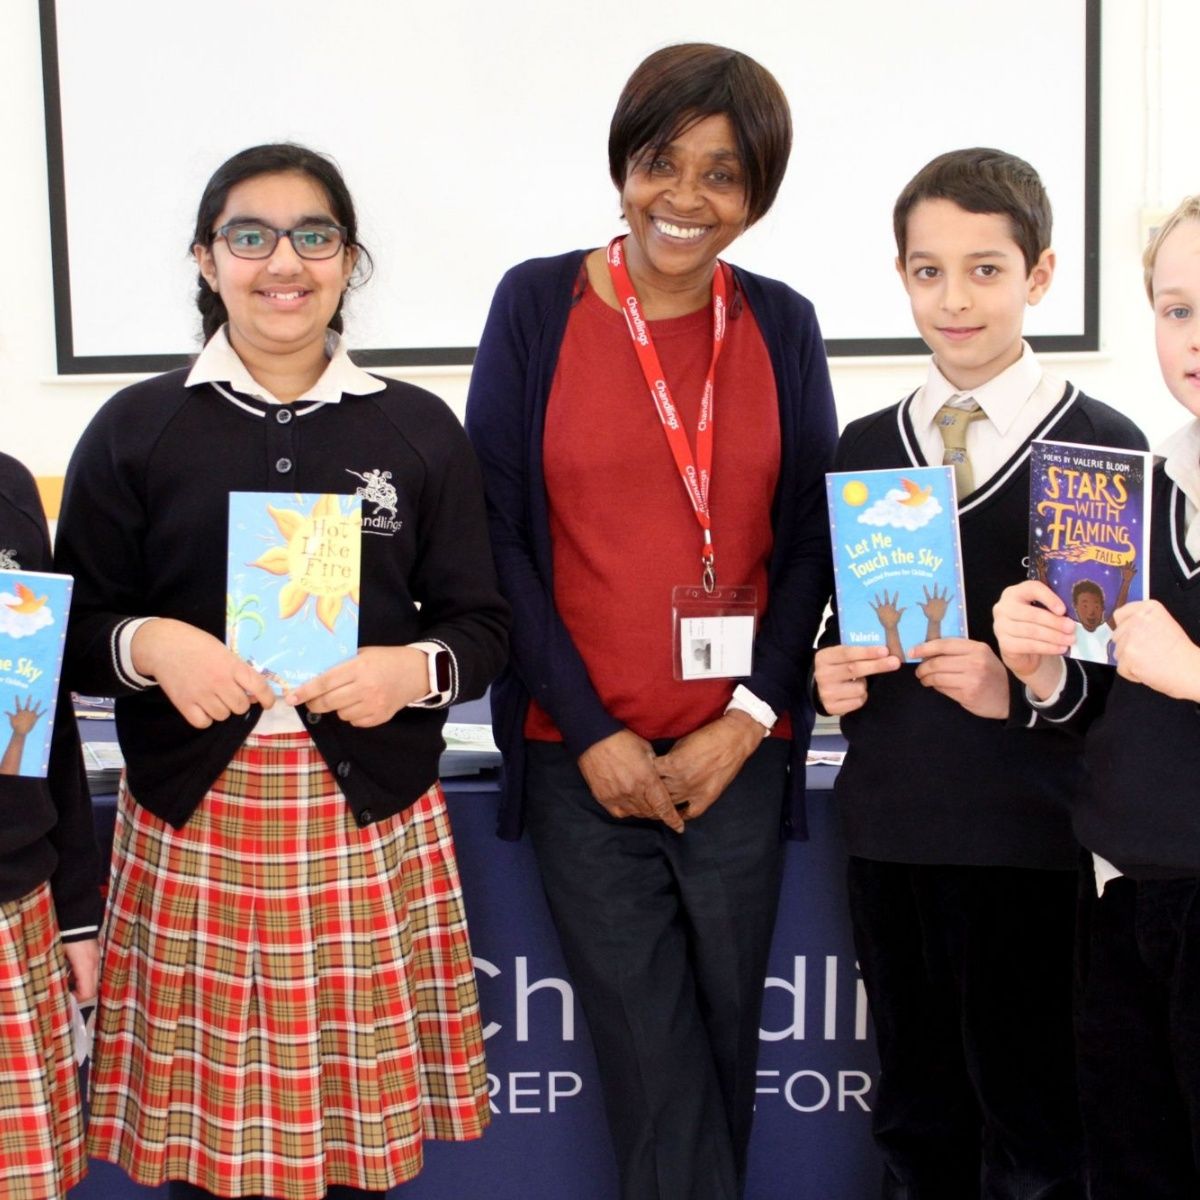 We were delighted to welcome the writer and performance poet Valerie Bloom to Chandlings as part of a week filled with exciting World Book Day events. @PoetryVal #poetry chandlingspst.org/latest-news/va…